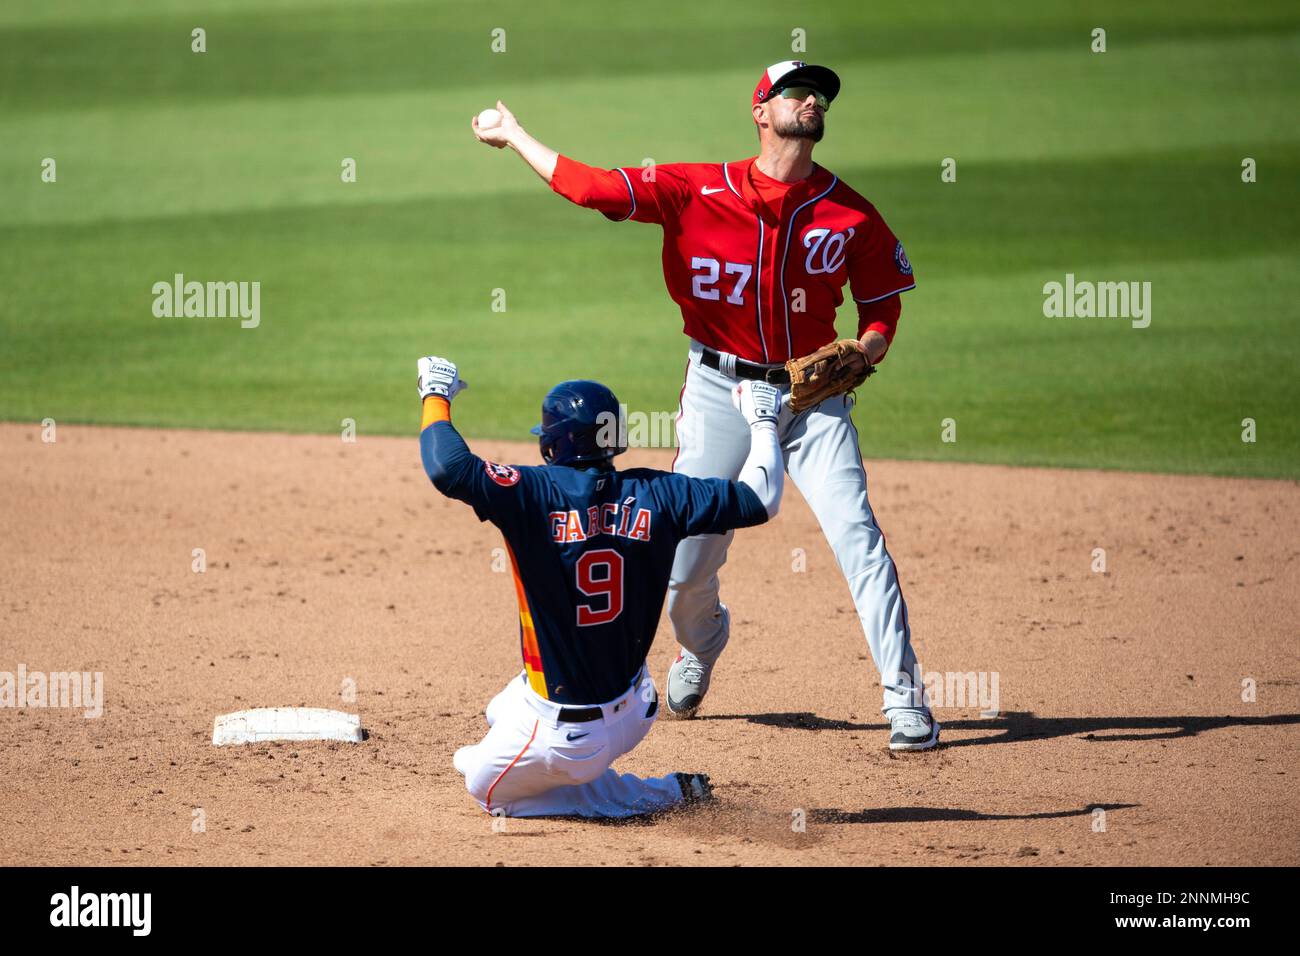 WEST PALM BEACH, FL - MARCH 14: Washington Nationals non-roster invitee  infielder Jordy Mercer (27) tags out Houston Astros infielder Robel Garcia  (9) at second base and throws the ball to first